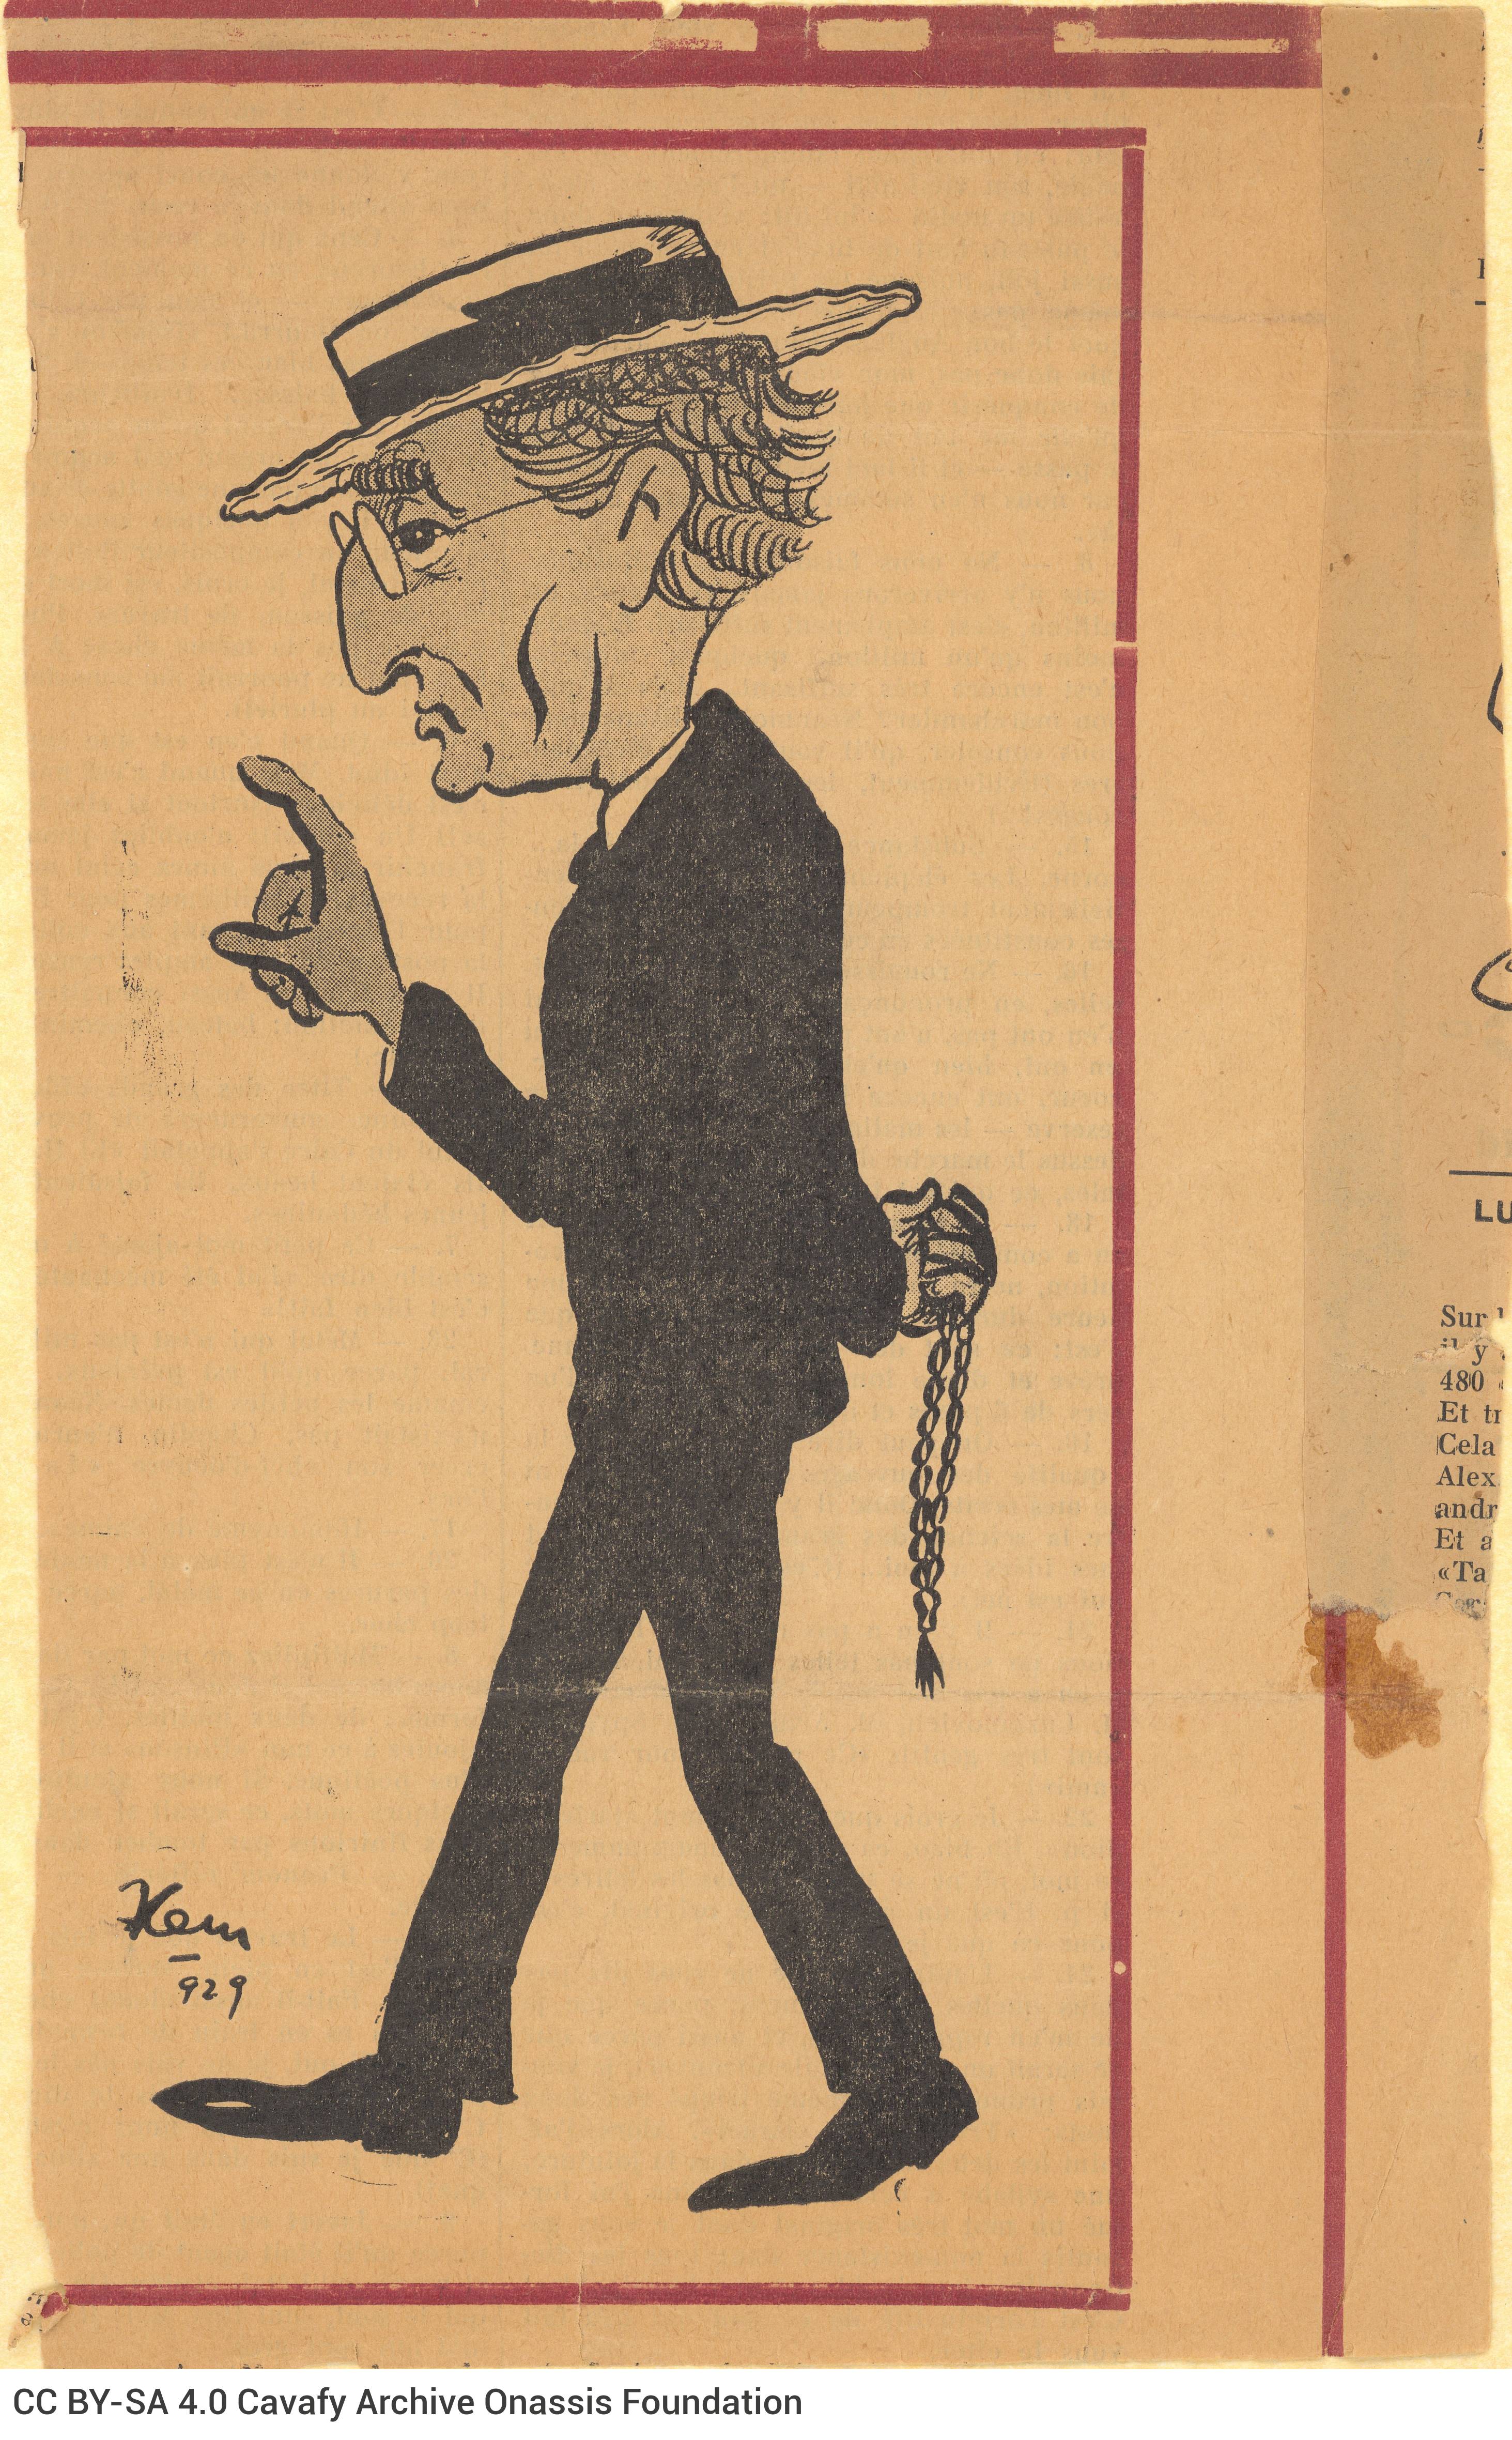 Cartoon-type sketch by Kem (Kimon E. Maragkos), cut off from a French newspaper. It depicts Cavafy in profile view, walking t